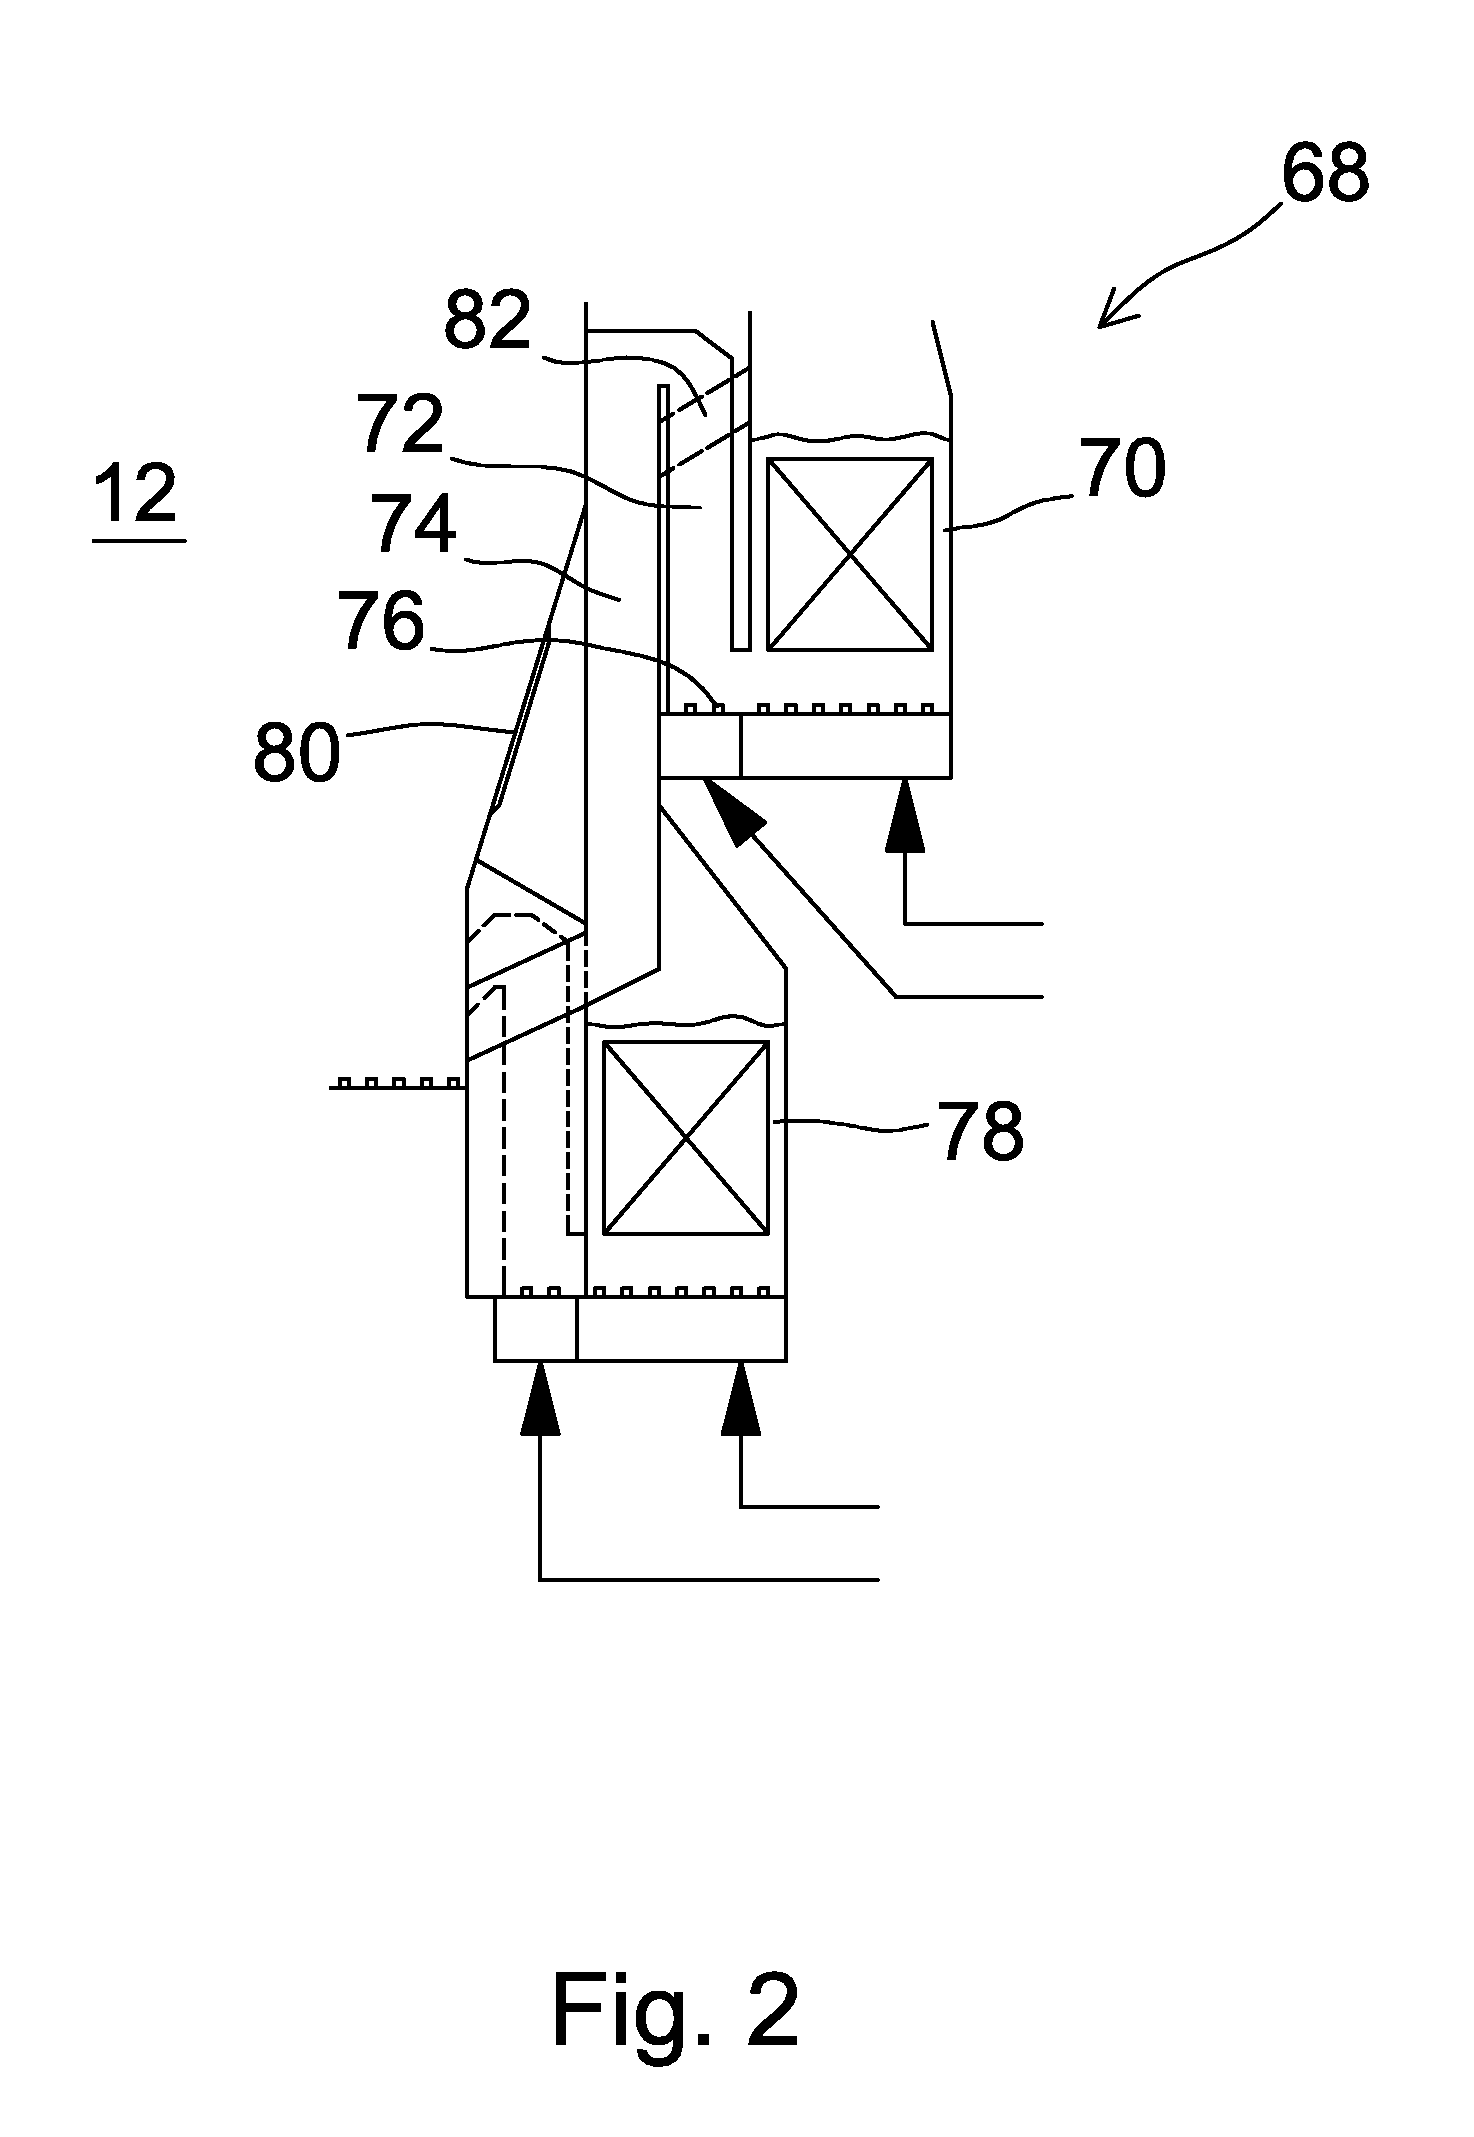 Fluidized Bed Heat Exchanger for a Circulating Fluidized Bed Boiler and a Circulating Fluidized Bed Boiler with a Fluidized Bed Heat Exchanger